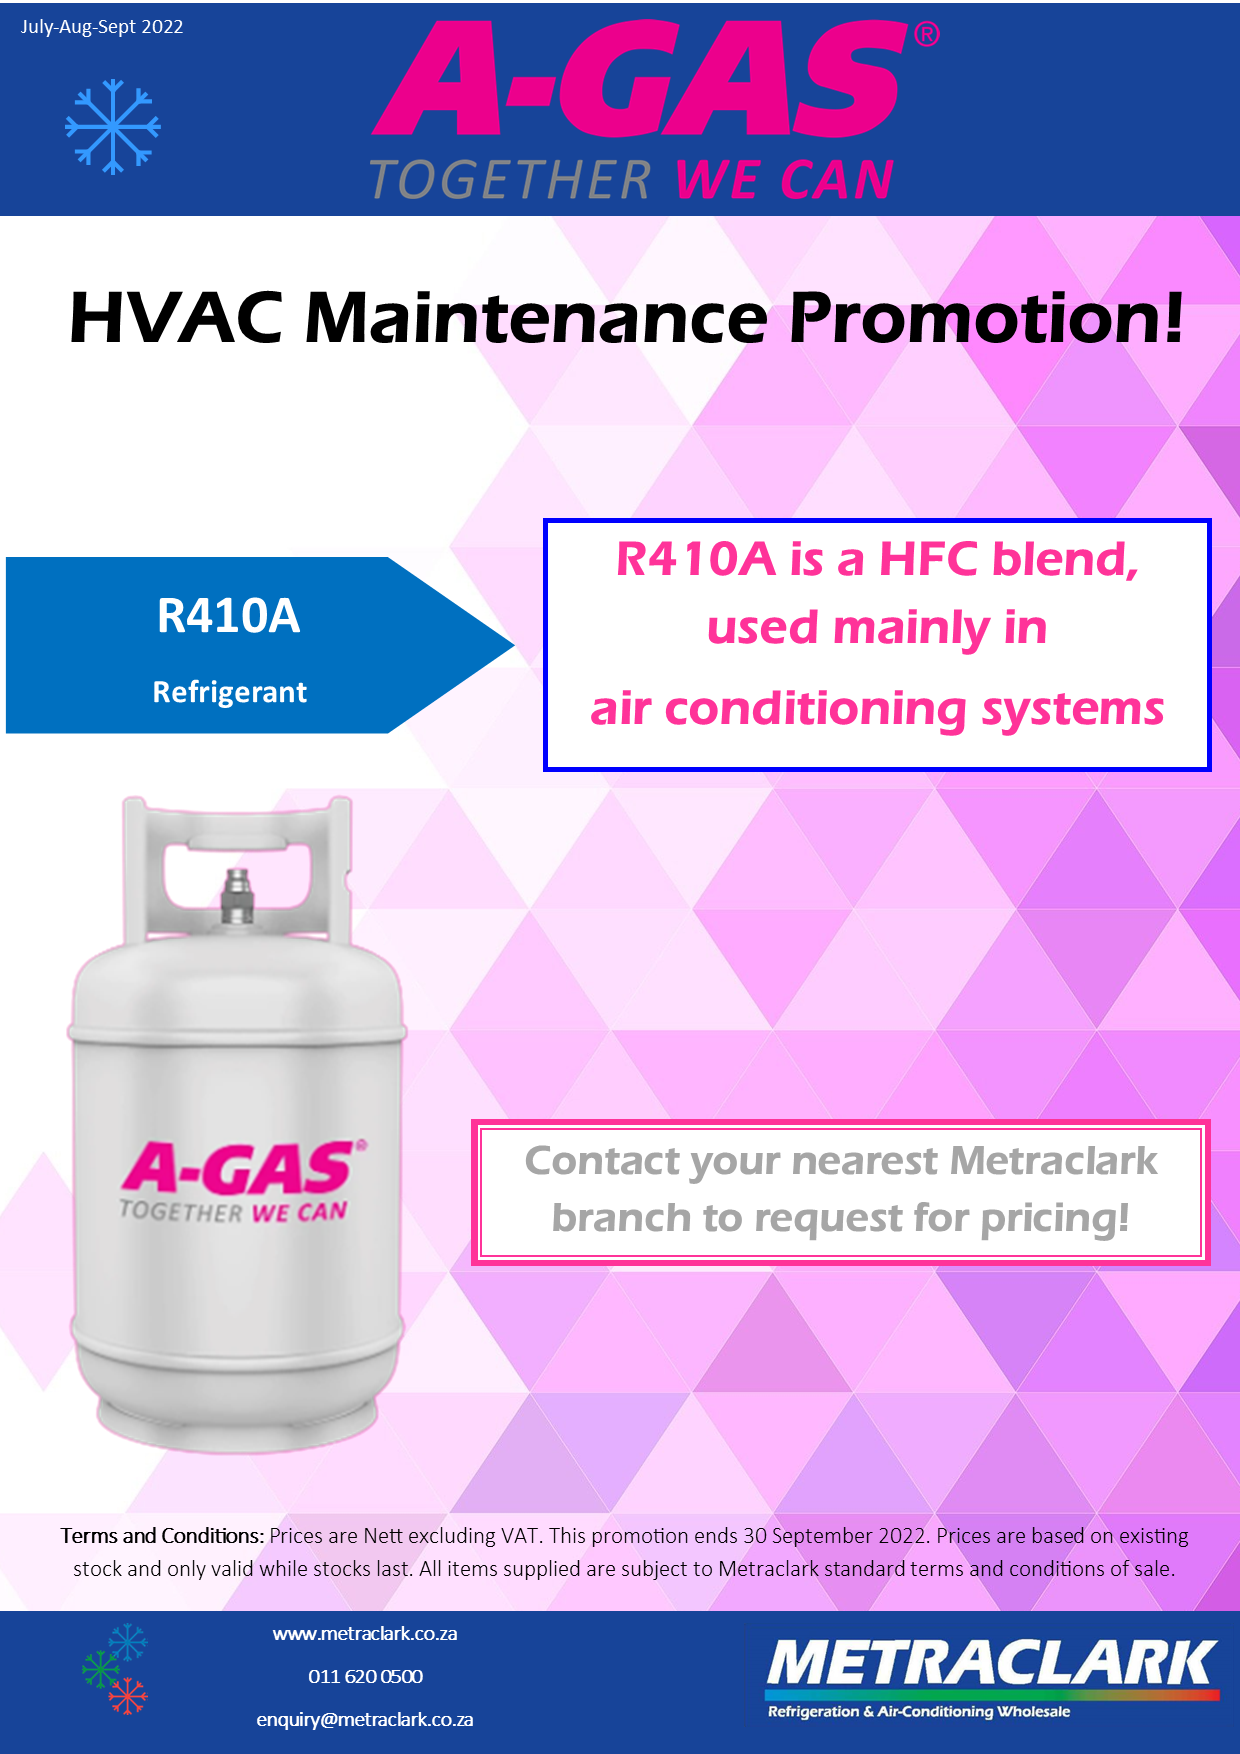 Looking for the R410A Refrigerant? Check out the latest promotion!